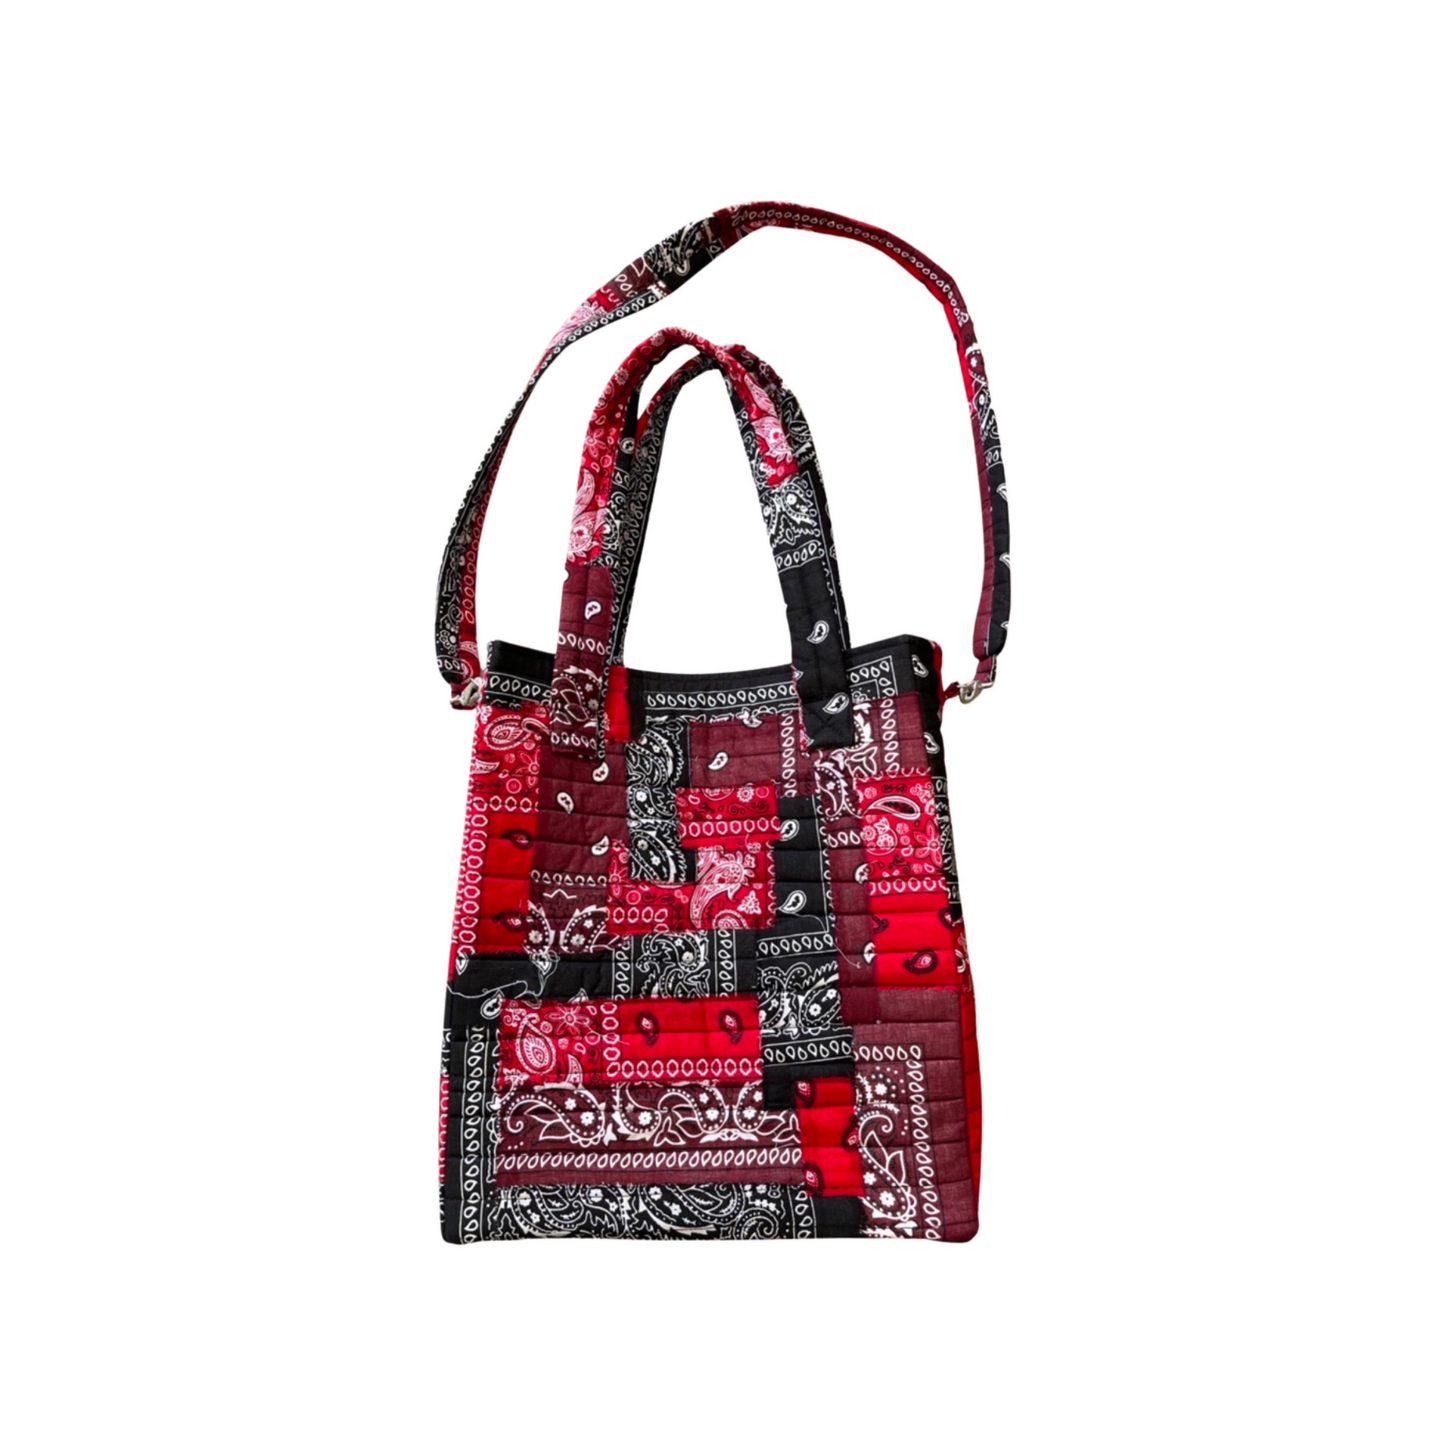 Bardot Quilted Patchwork Tote Bag